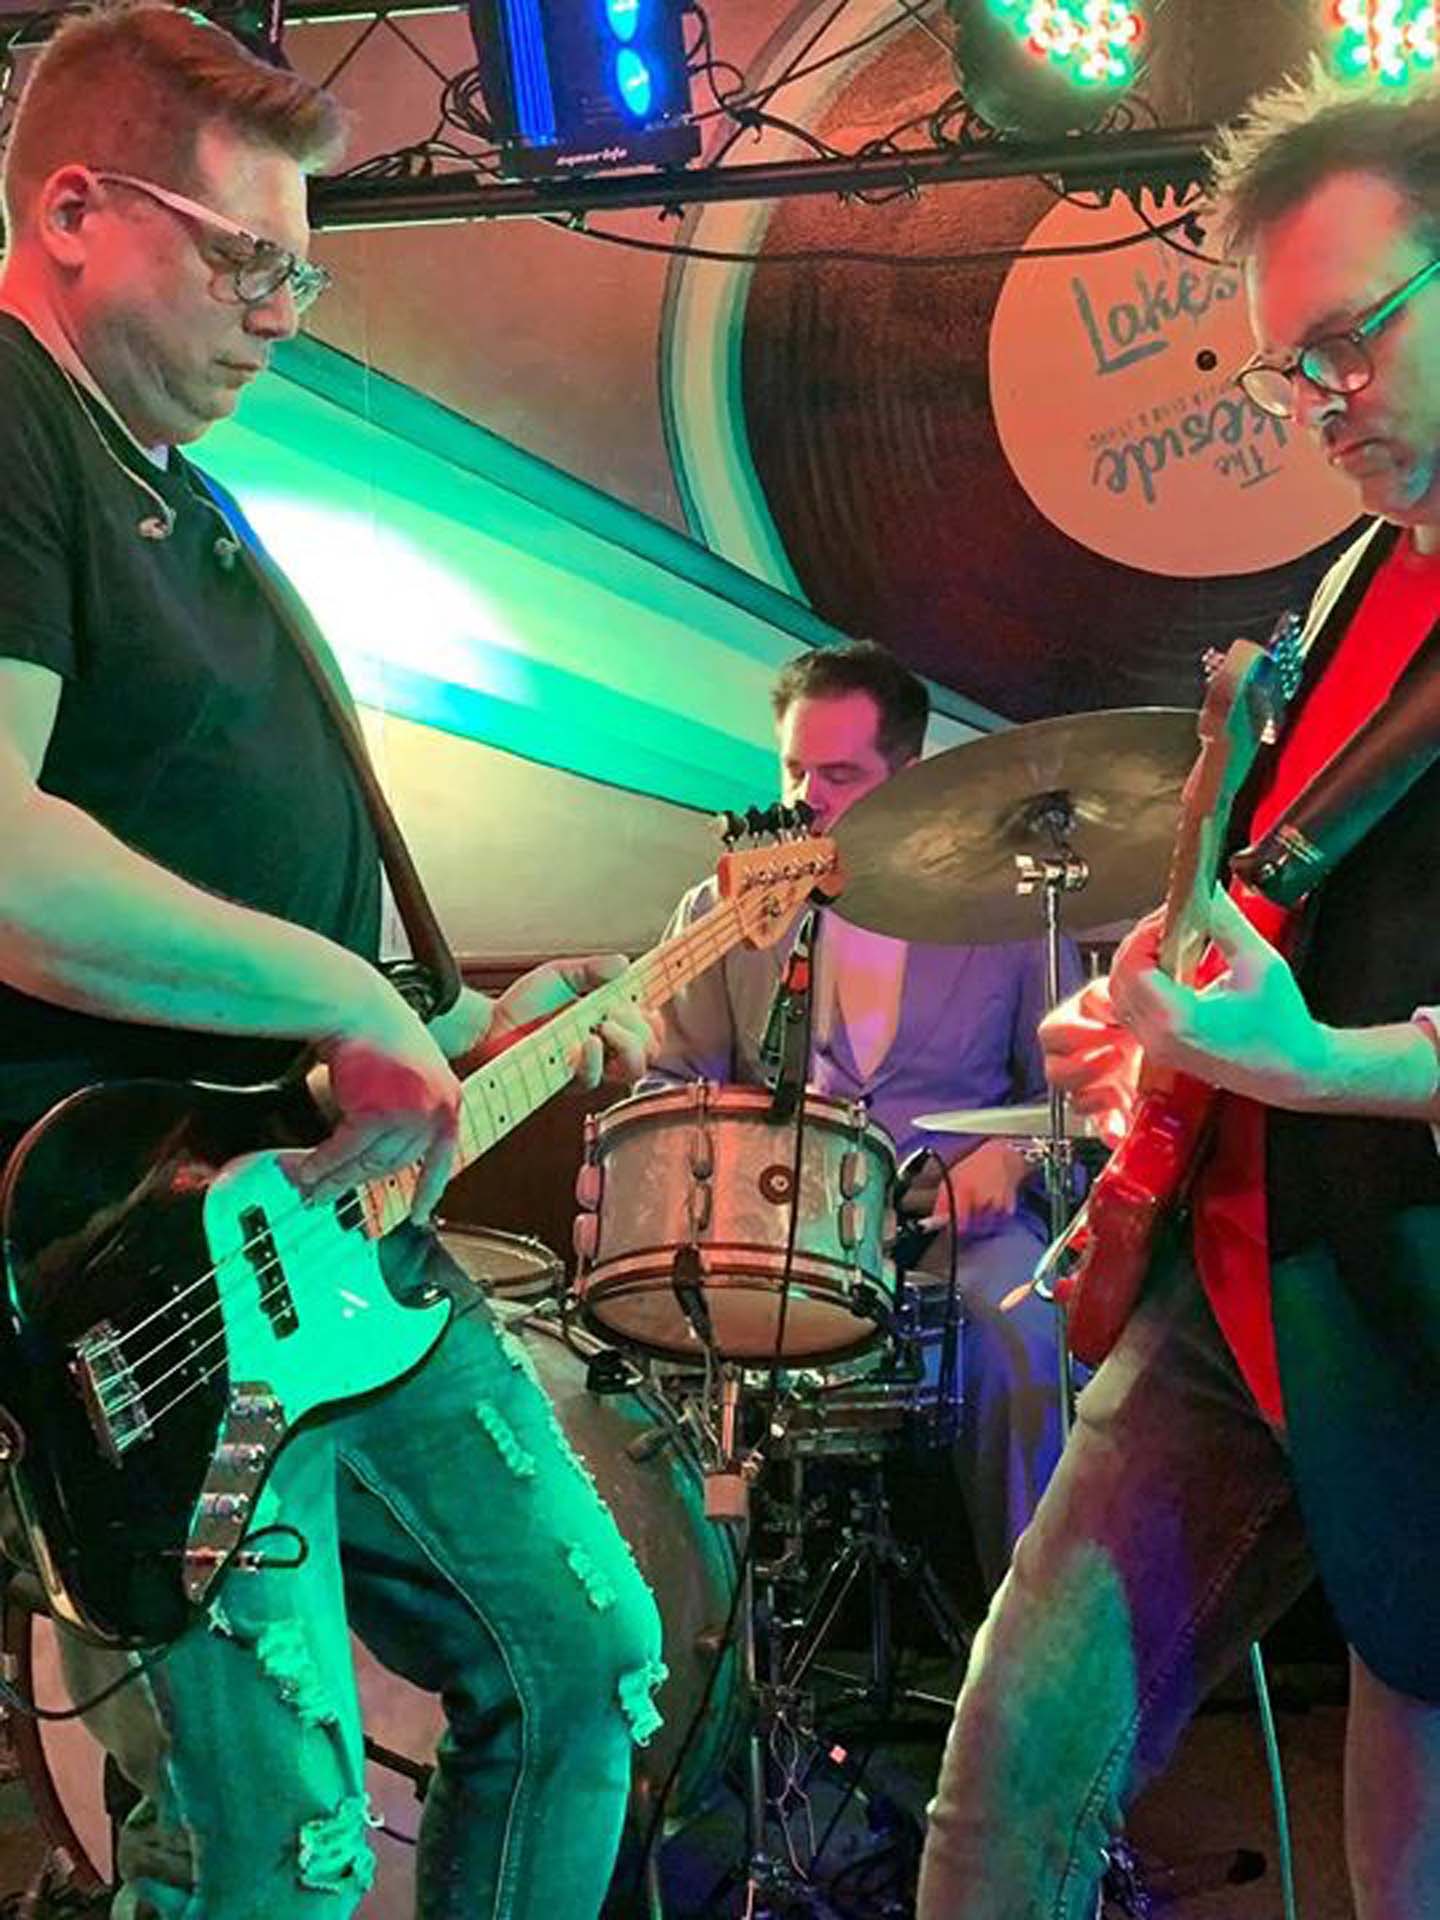 man playing a bass guitar on the left and another playing a guitar on the right with the drummer in the background in the middle.